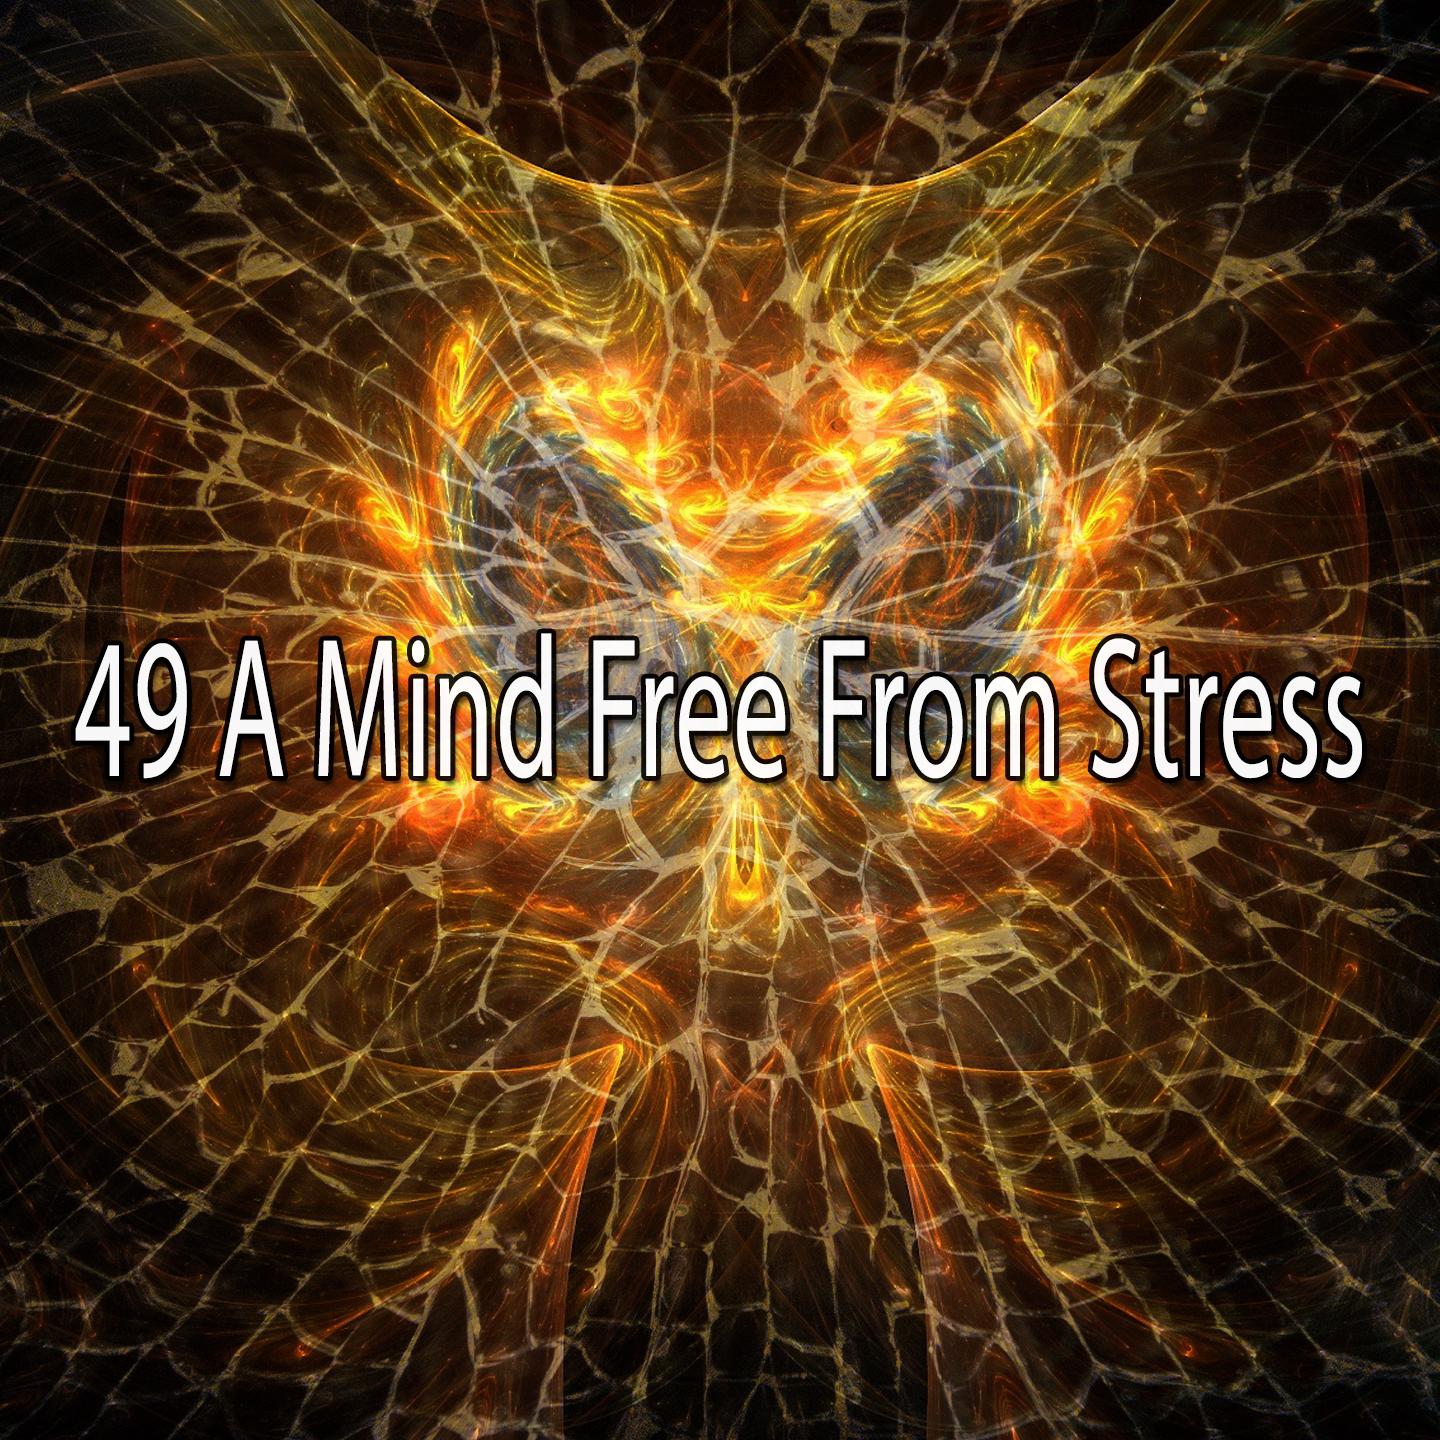 49 A Mind Free from Stress